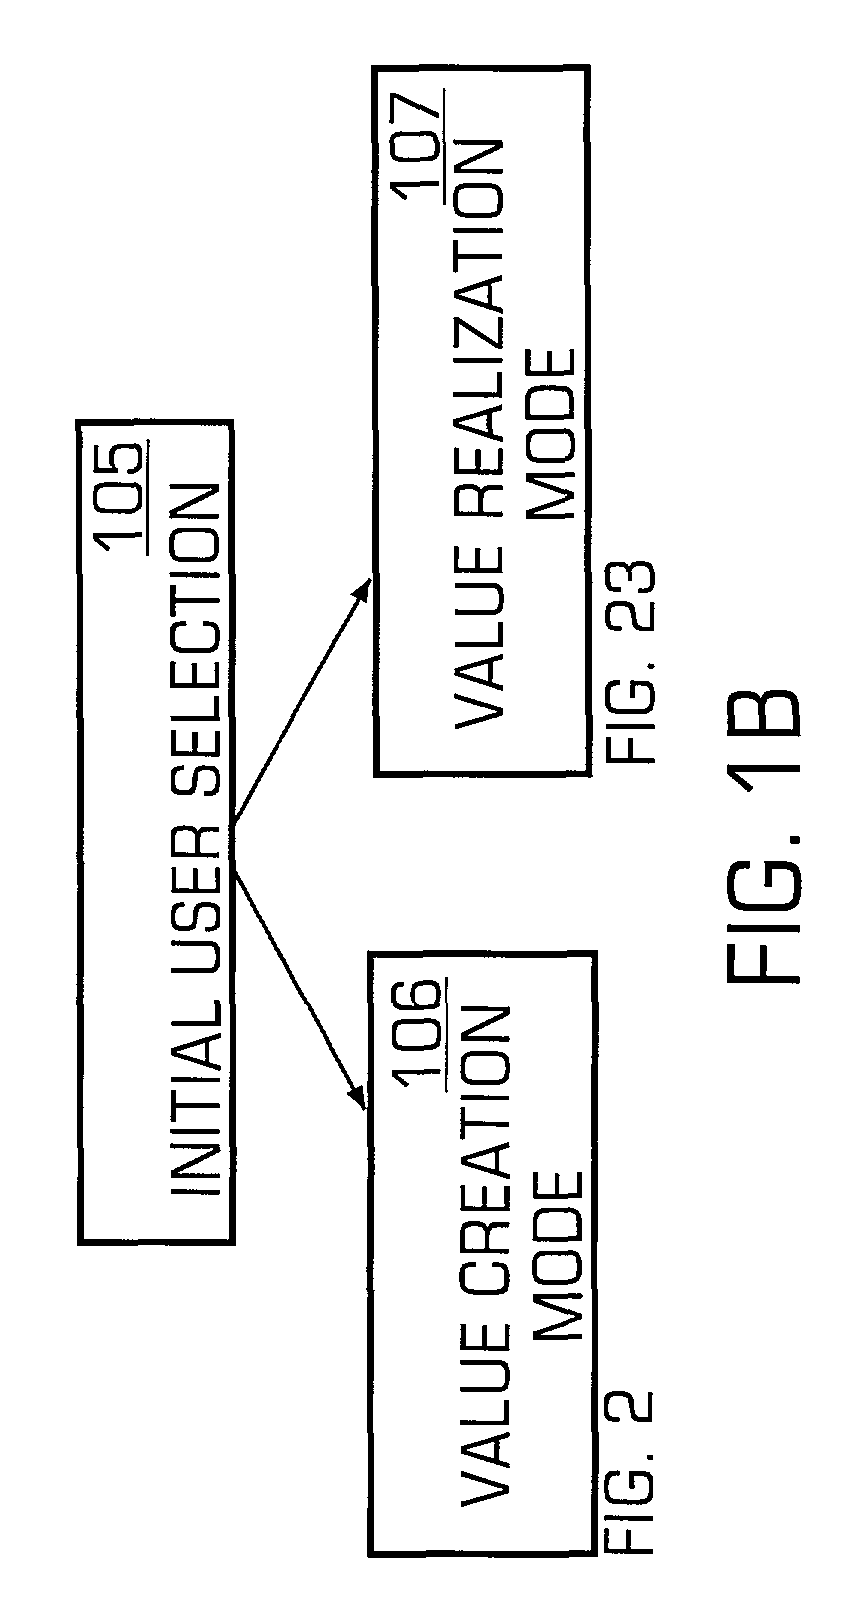 Data processing system for analysis of financial and non-financial value creation and value realization performance of a business enterprise for provisioning of real-time assurance reports